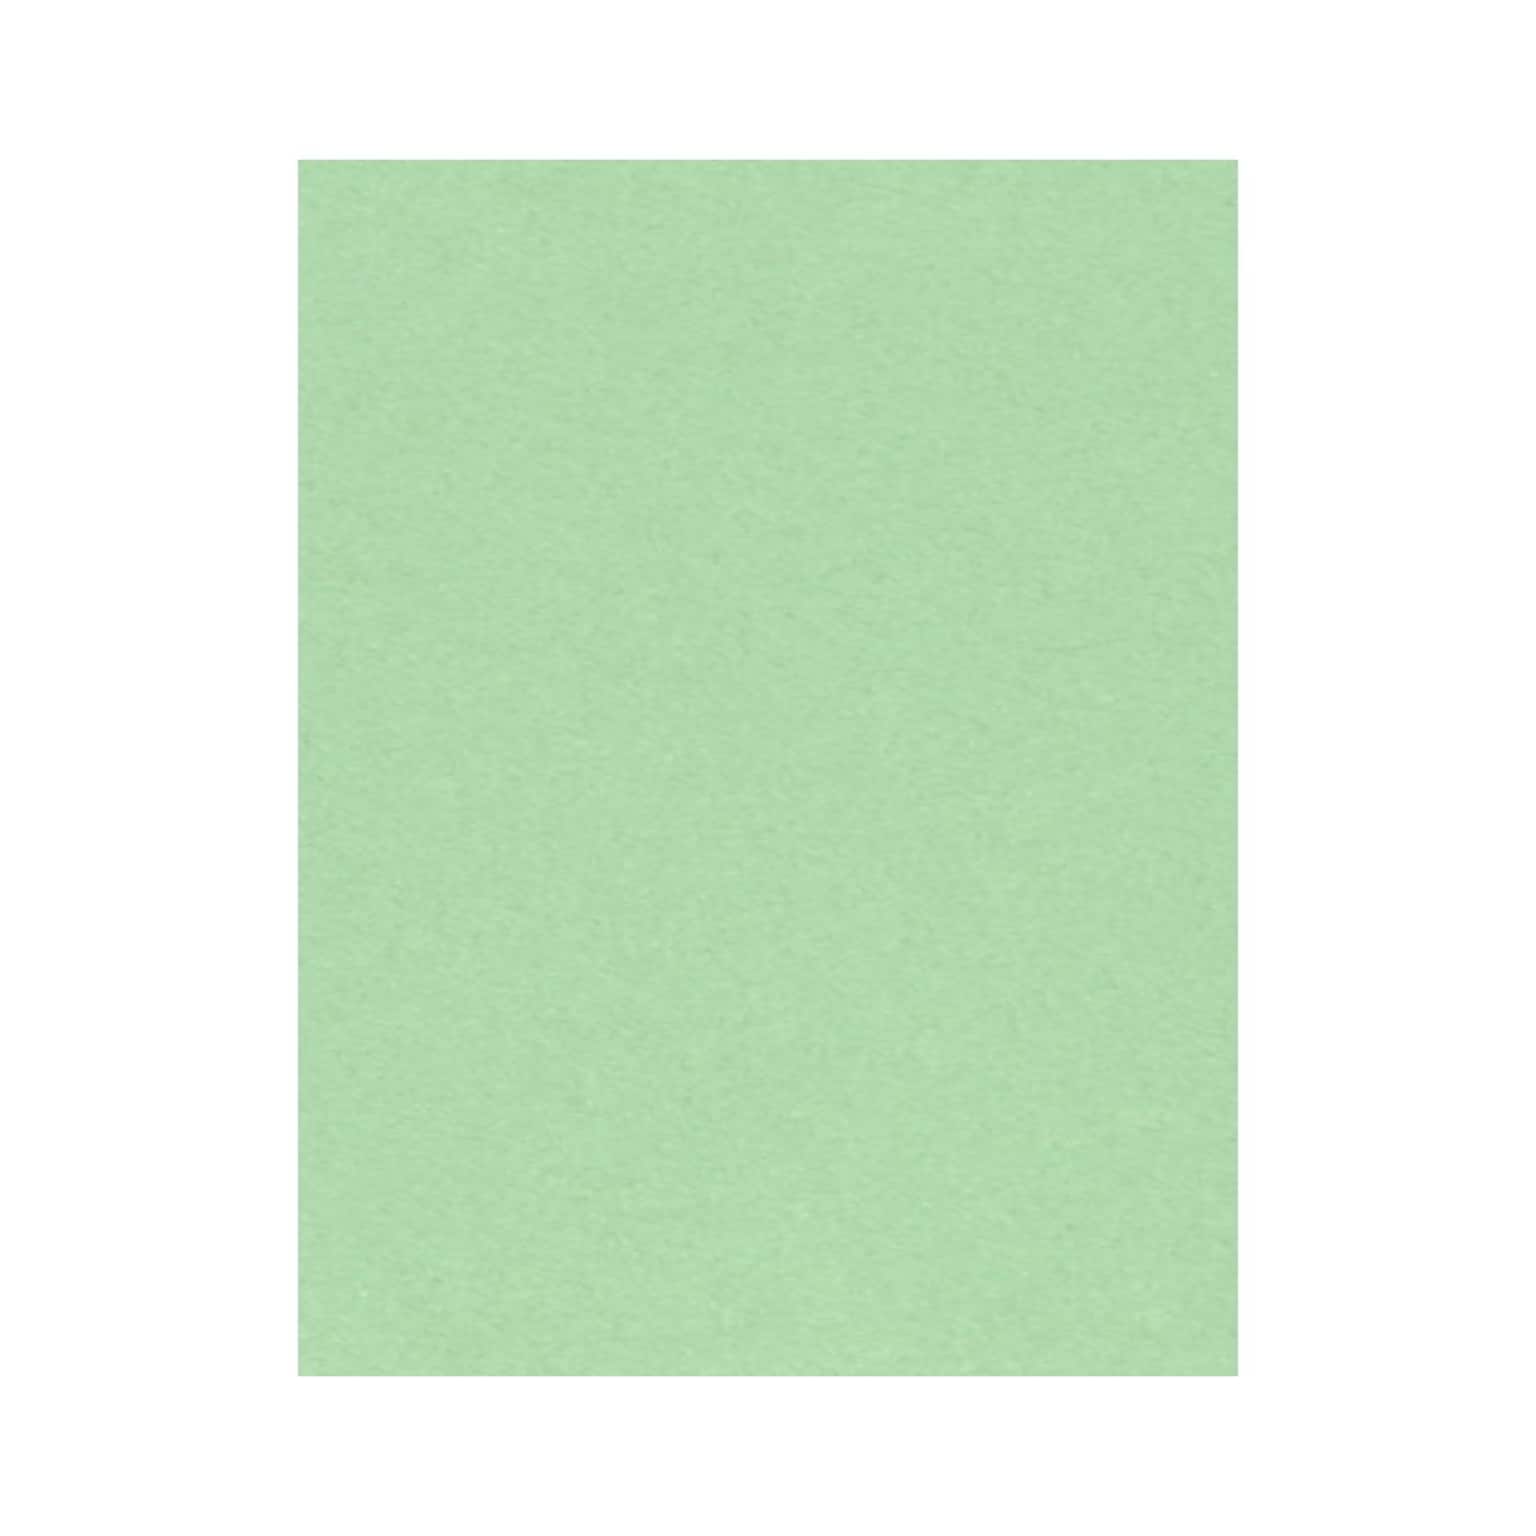 Lux Cardstock 8.5 x 11 inch Pastel Green 1000/Pack